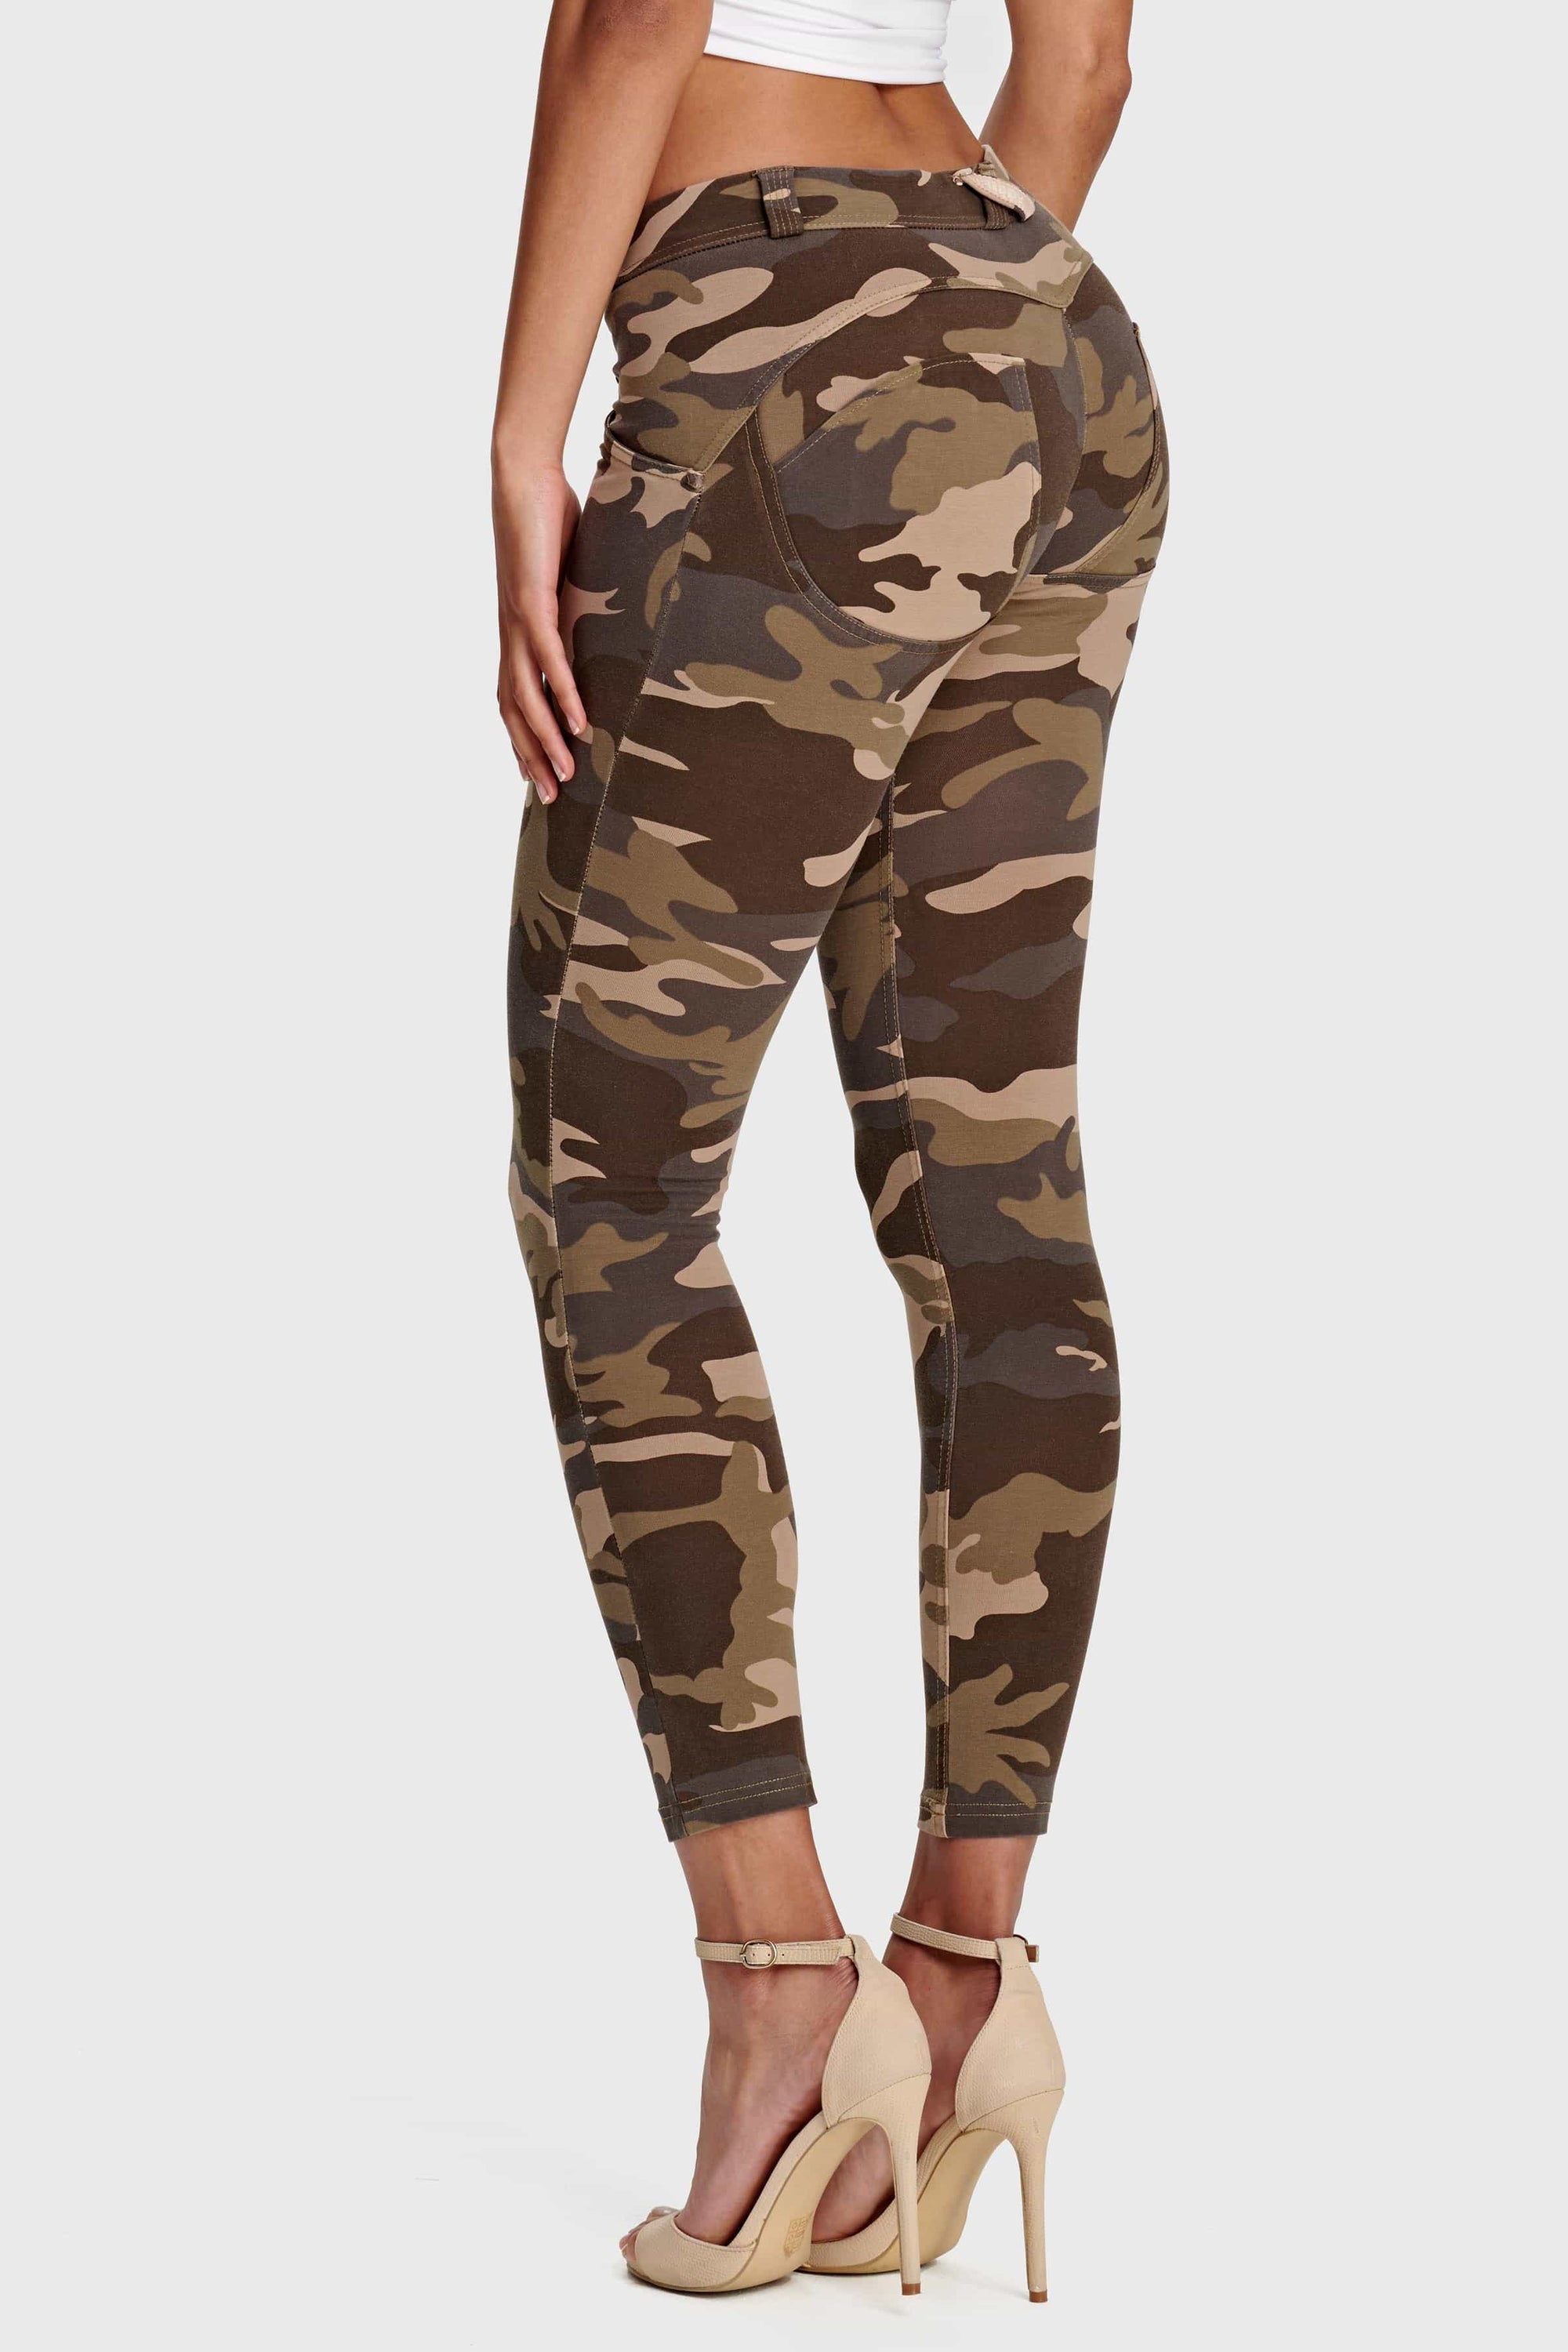 WR.UP® Fashion - Mid Rise - Petite Length - Brown Camo 4